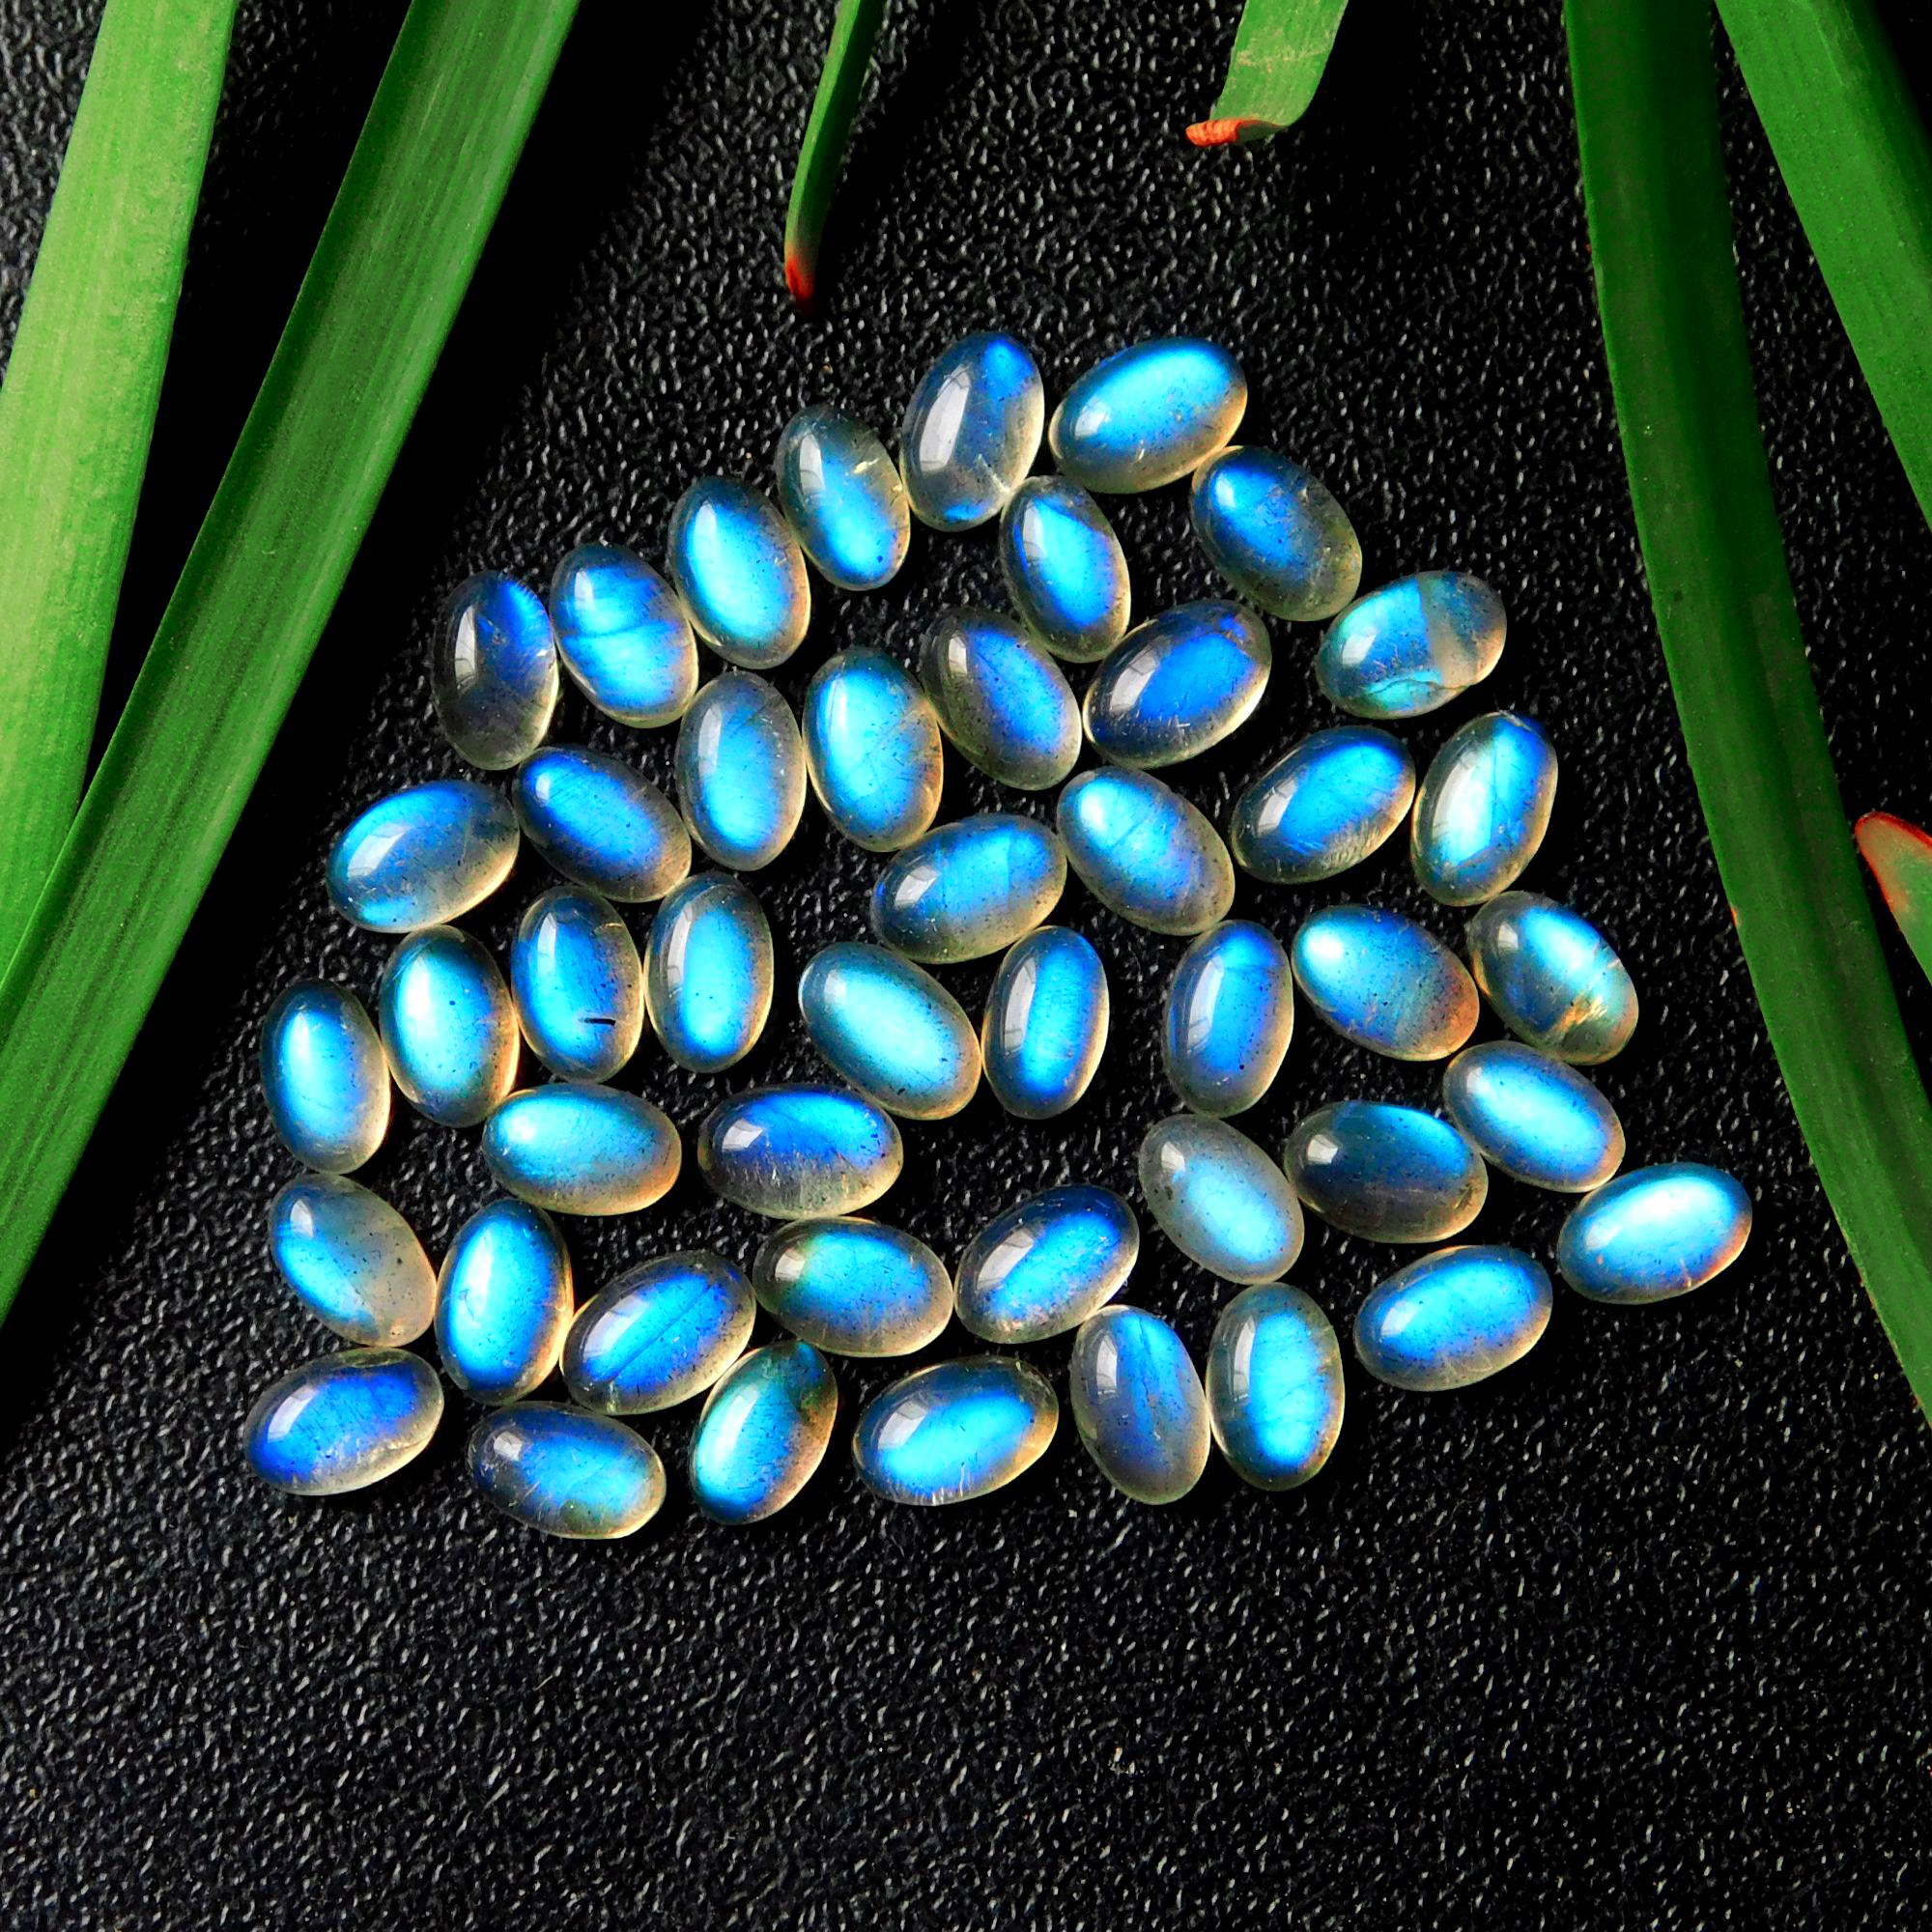 46 Pcs 25.15 Cts Natural Celibrated Labradorite Oval Cabochons Loose Gemstone Wholesale Lot Size 6x4mm